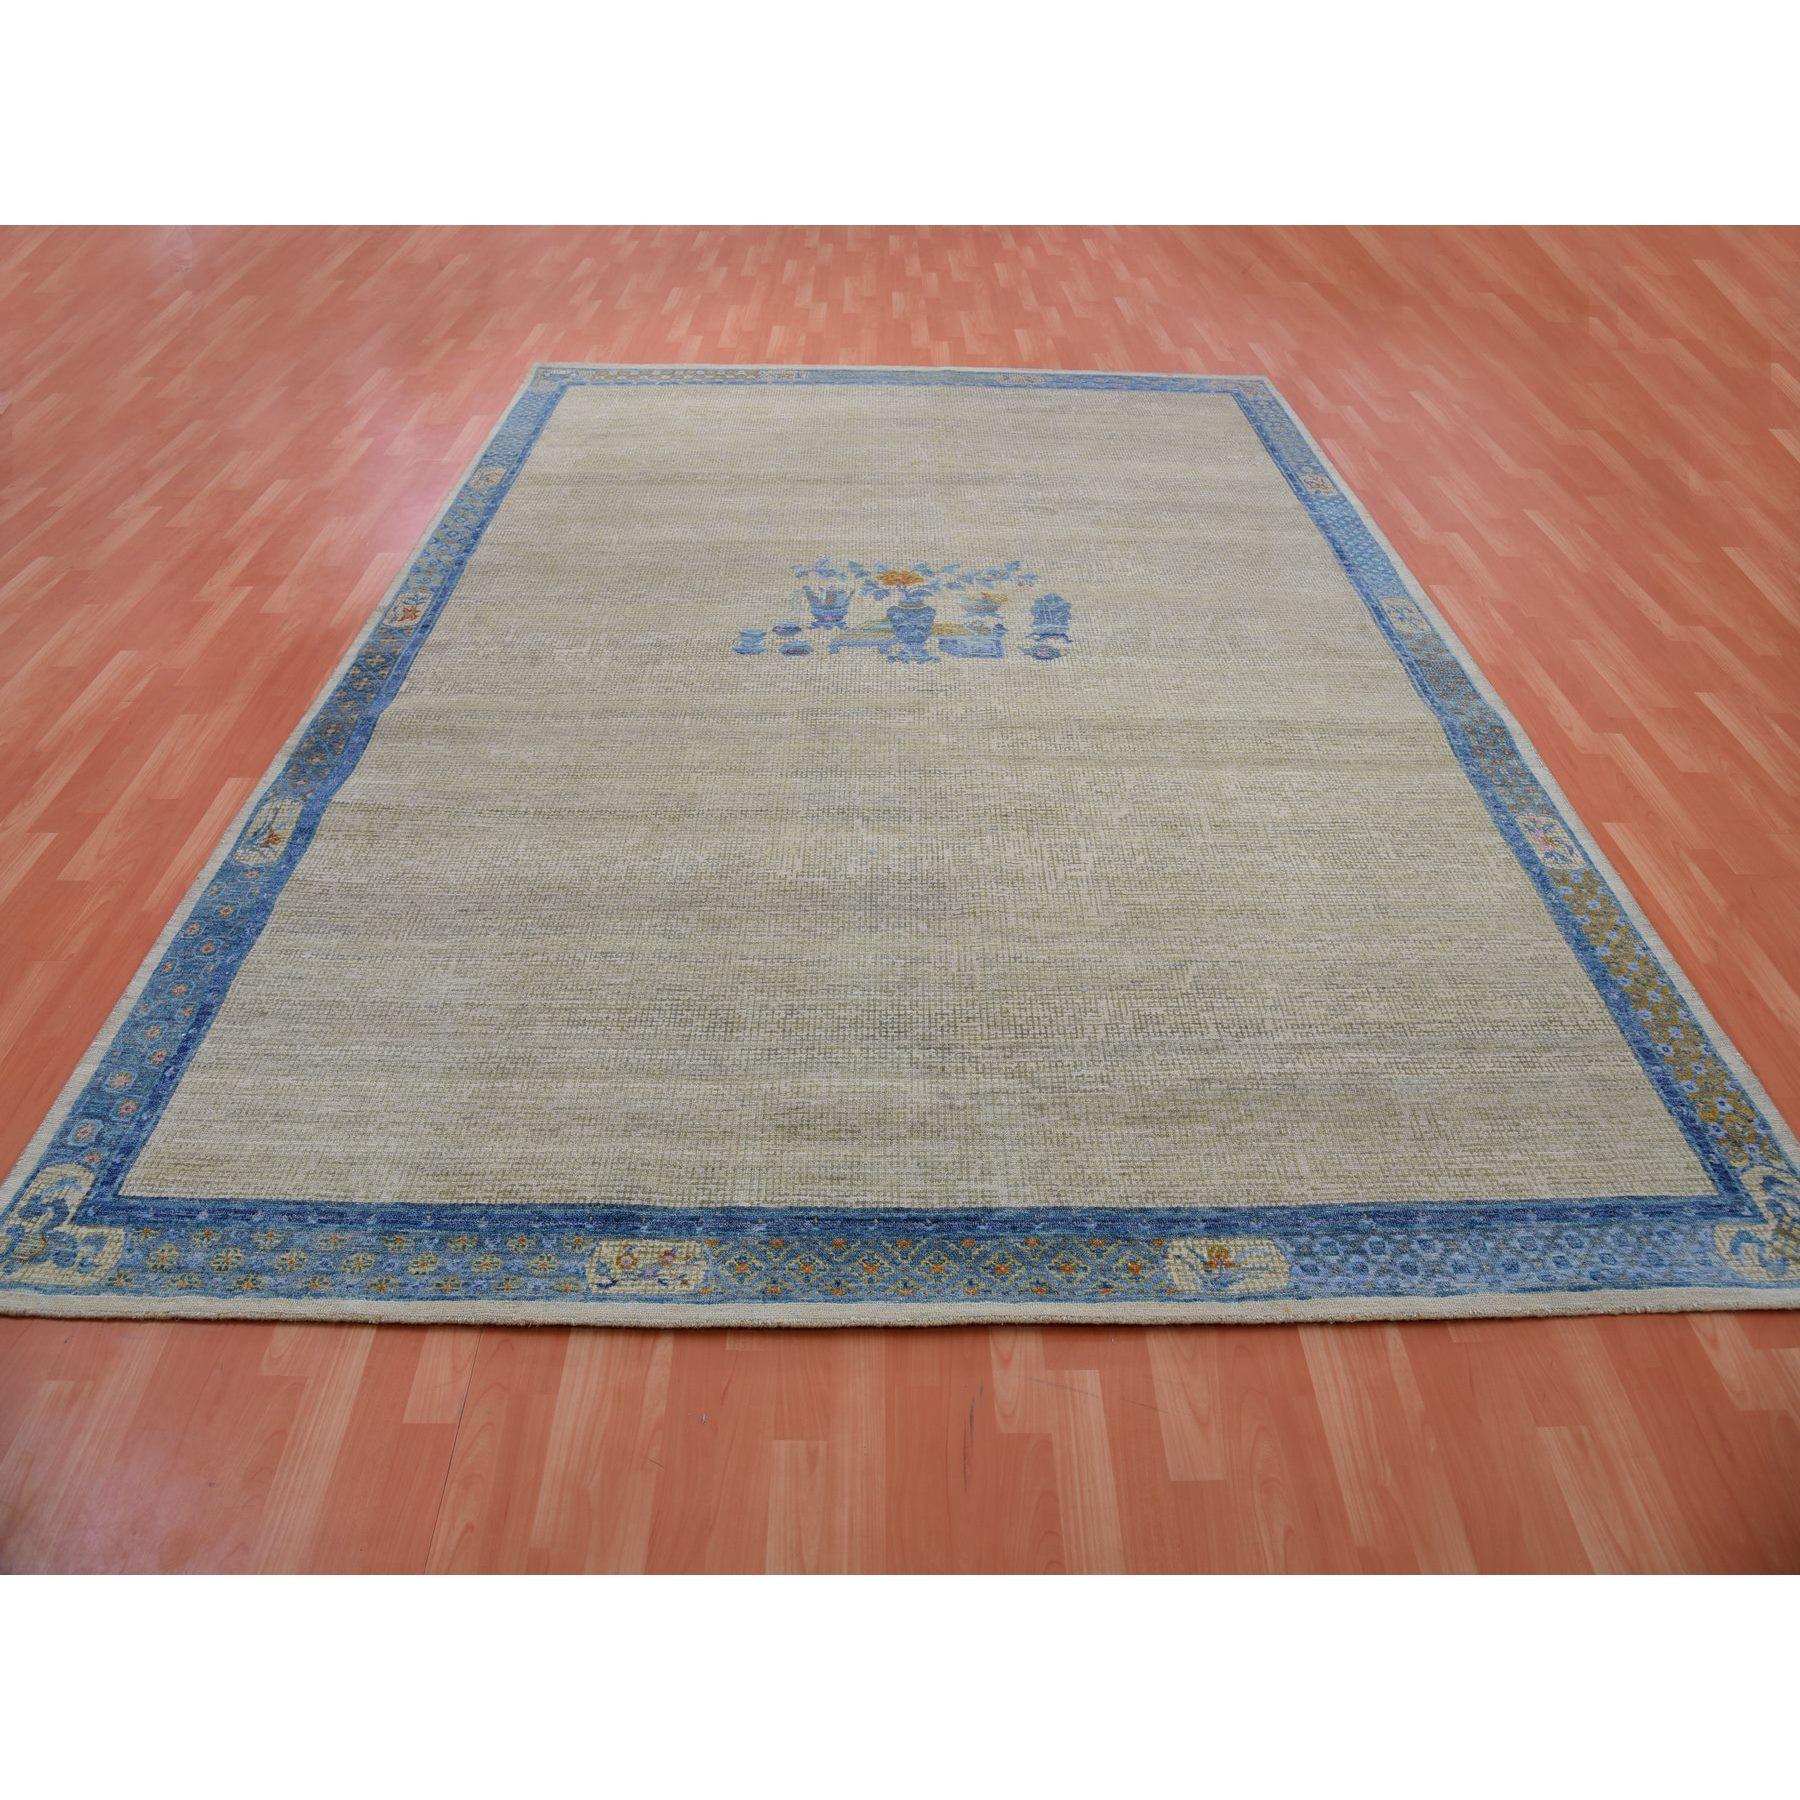 This fabulous Hand-Knotted carpet has been created and designed for extra strength and durability. This rug has been handcrafted for weeks in the traditional method that is used to make
Exact Rug Size in Feet and Inches : 9'1